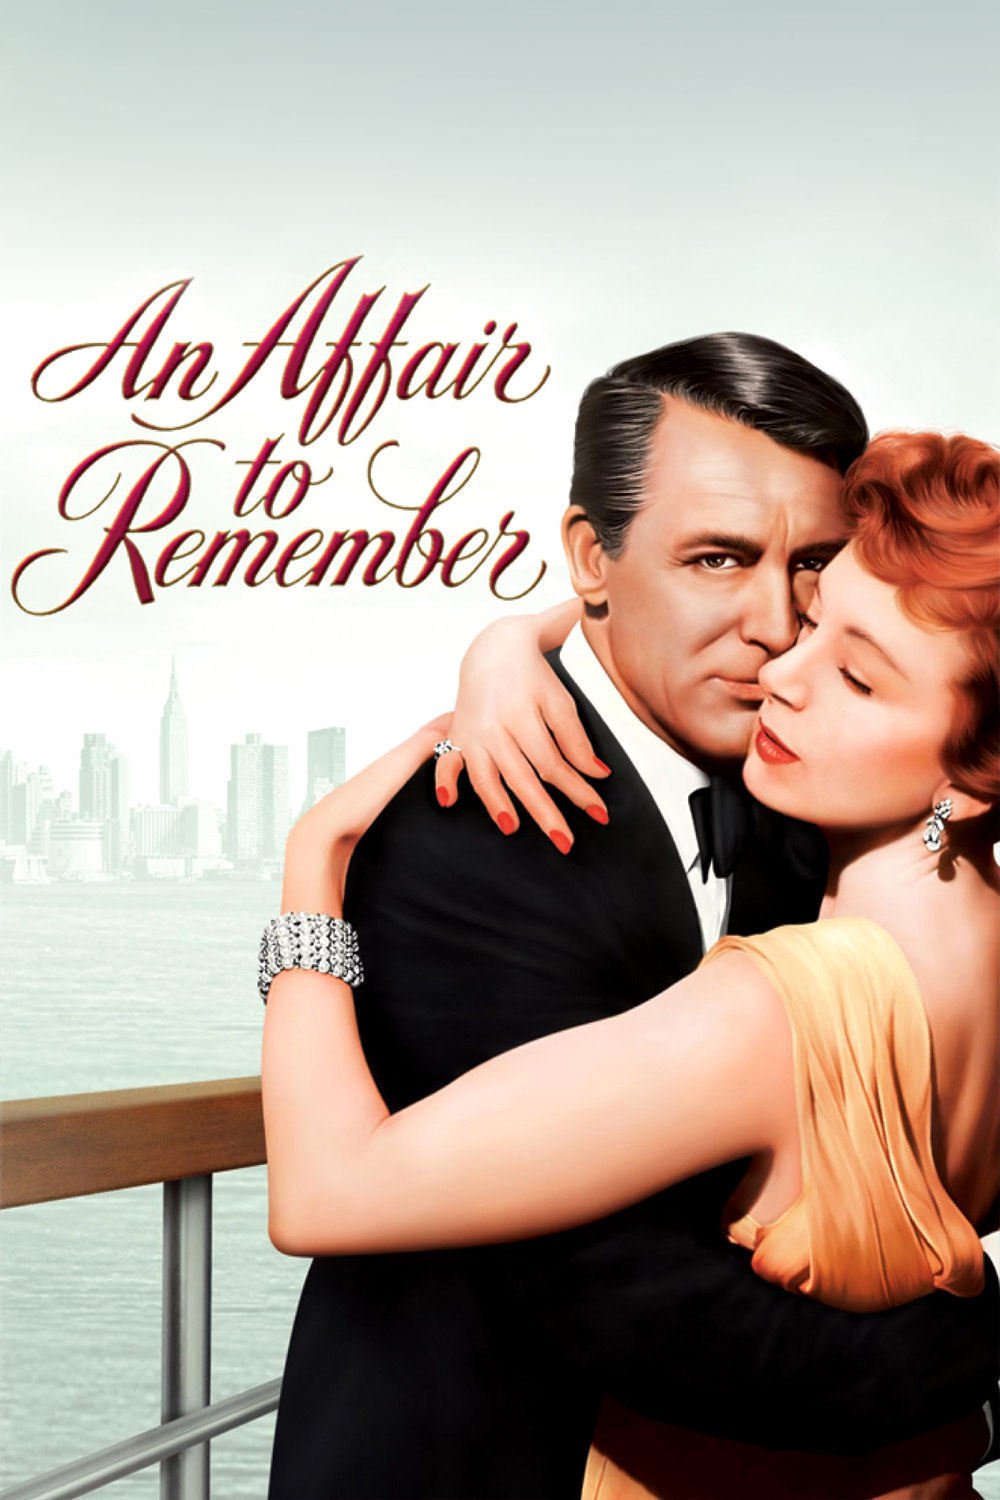 Poster for the movie "An Affair to Remember"